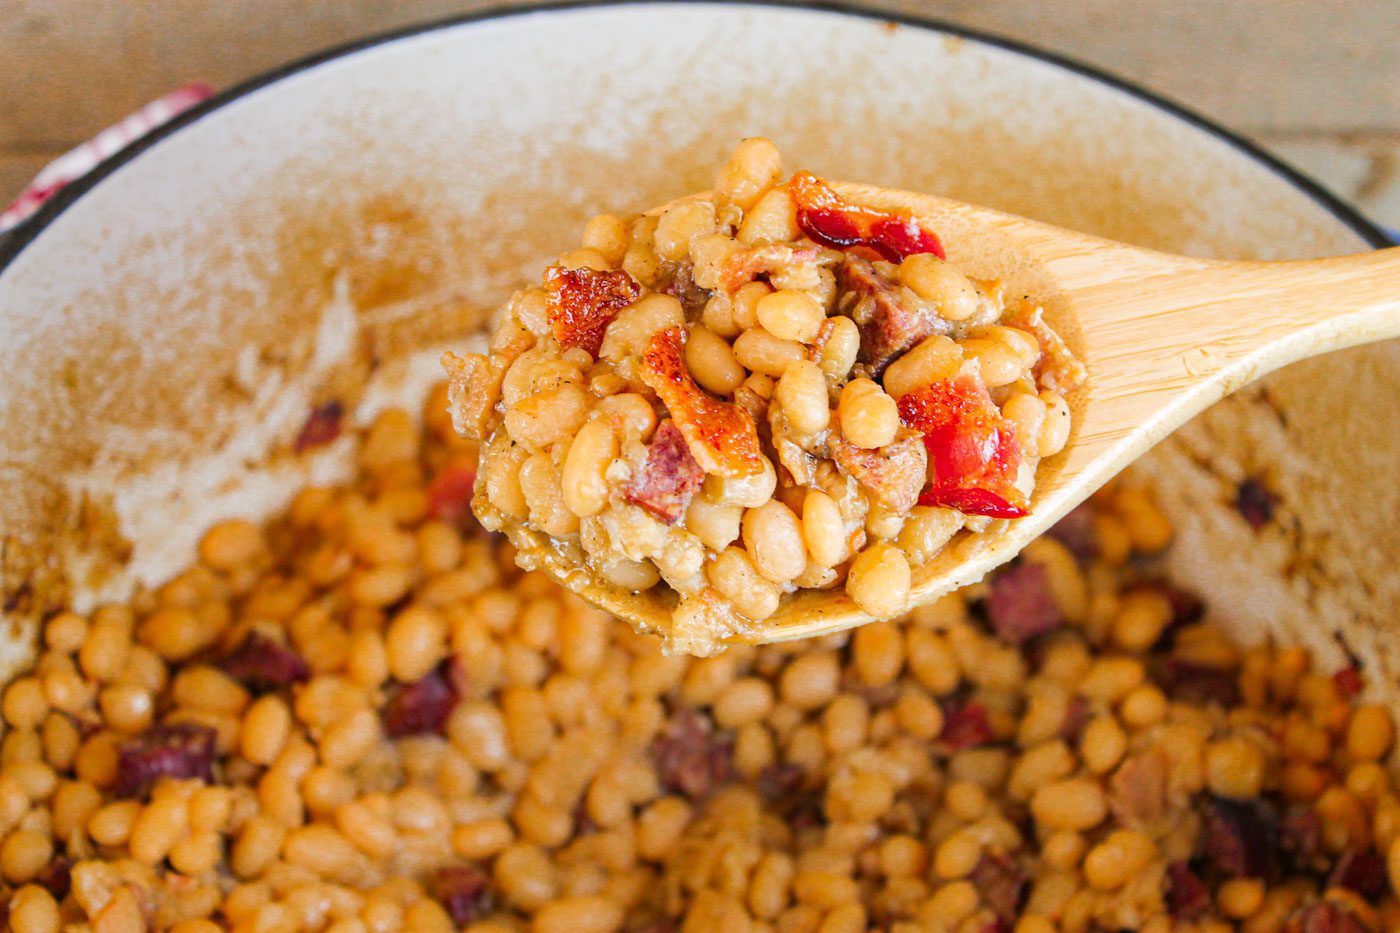 wooden spoon full of a large amount of baked beans and bacon